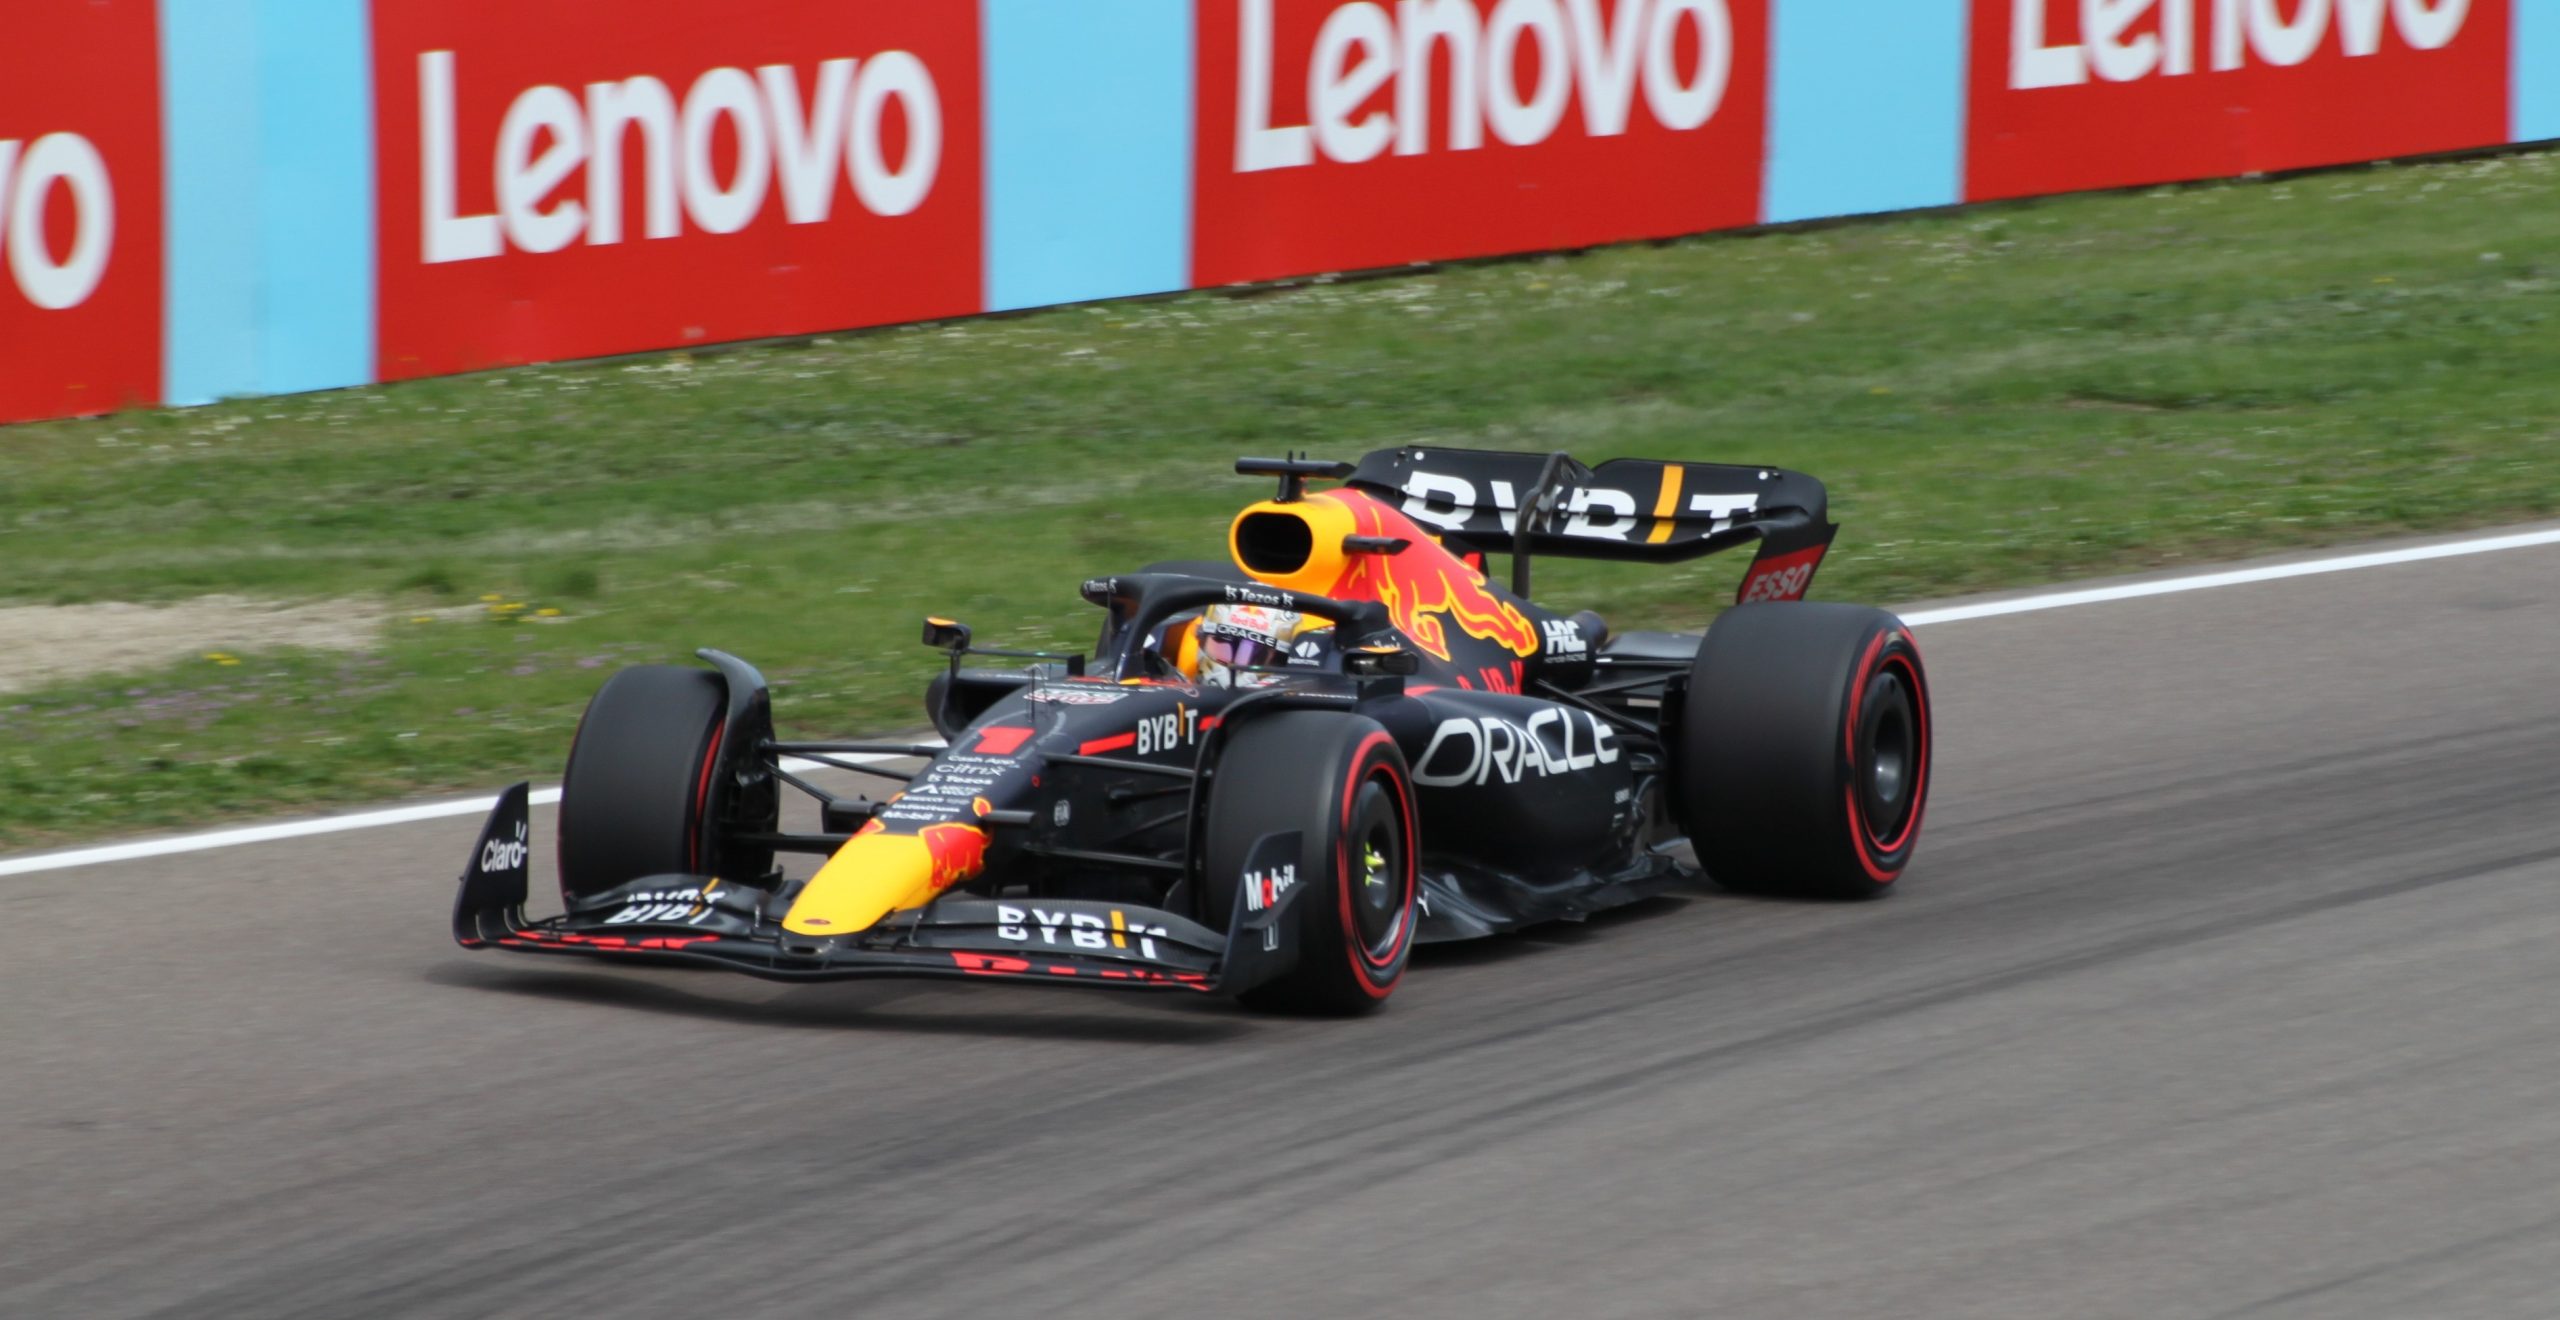 Max Verstappen on track in his Red Bull Formula 1 racing car.